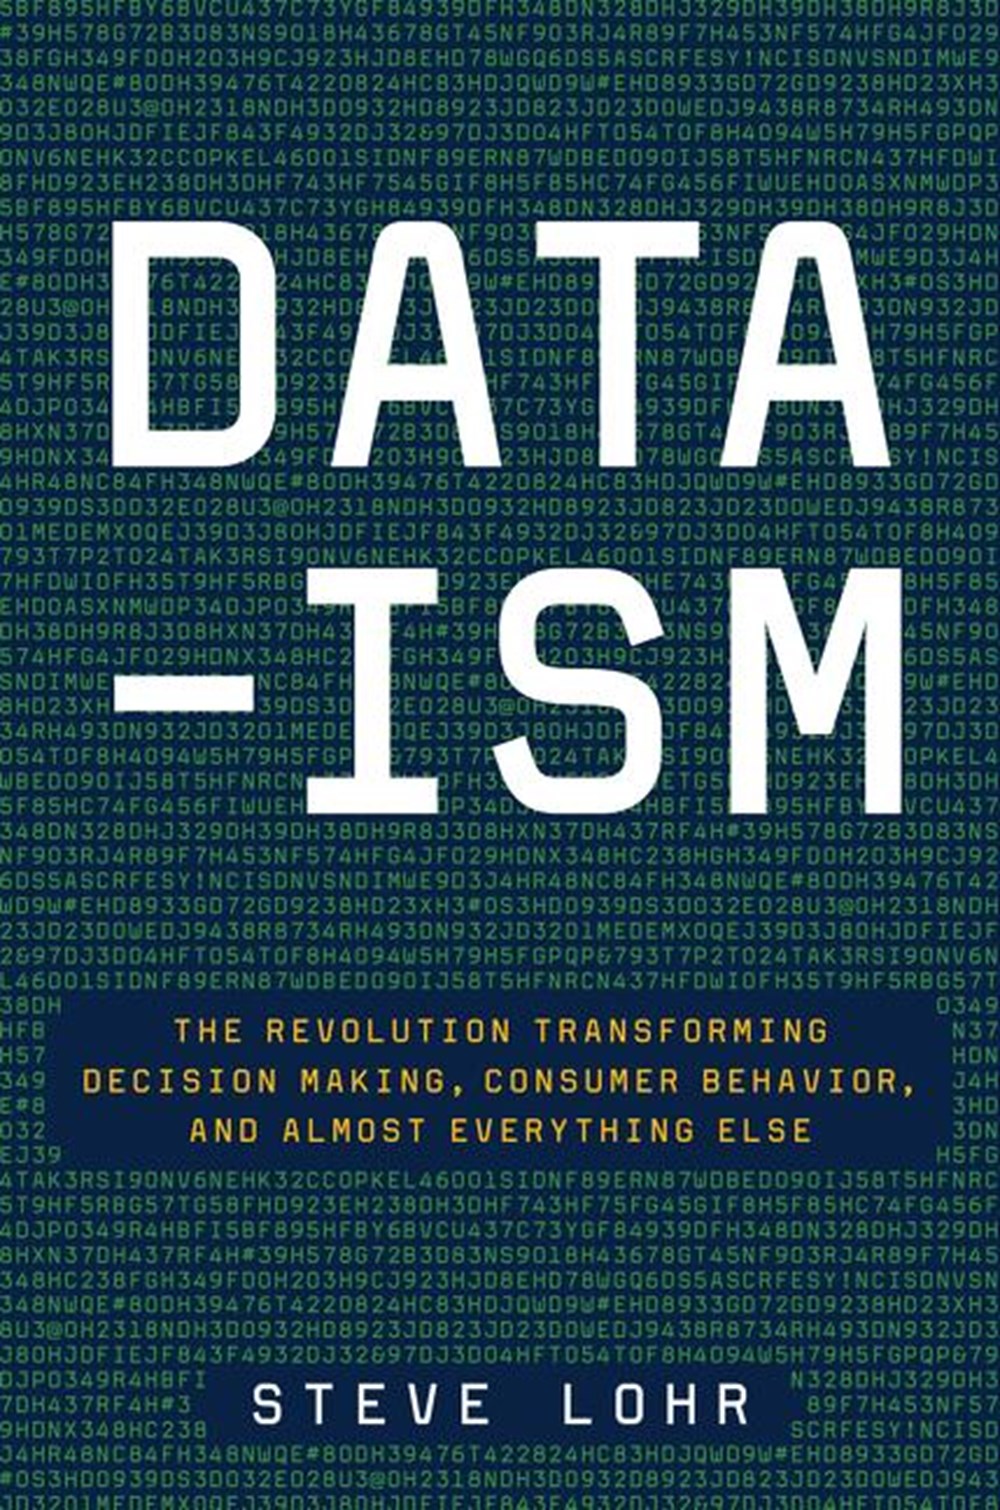 Data-Ism The Revolution Transforming Decision Making, Consumer Behavior, and Almost Everything Else